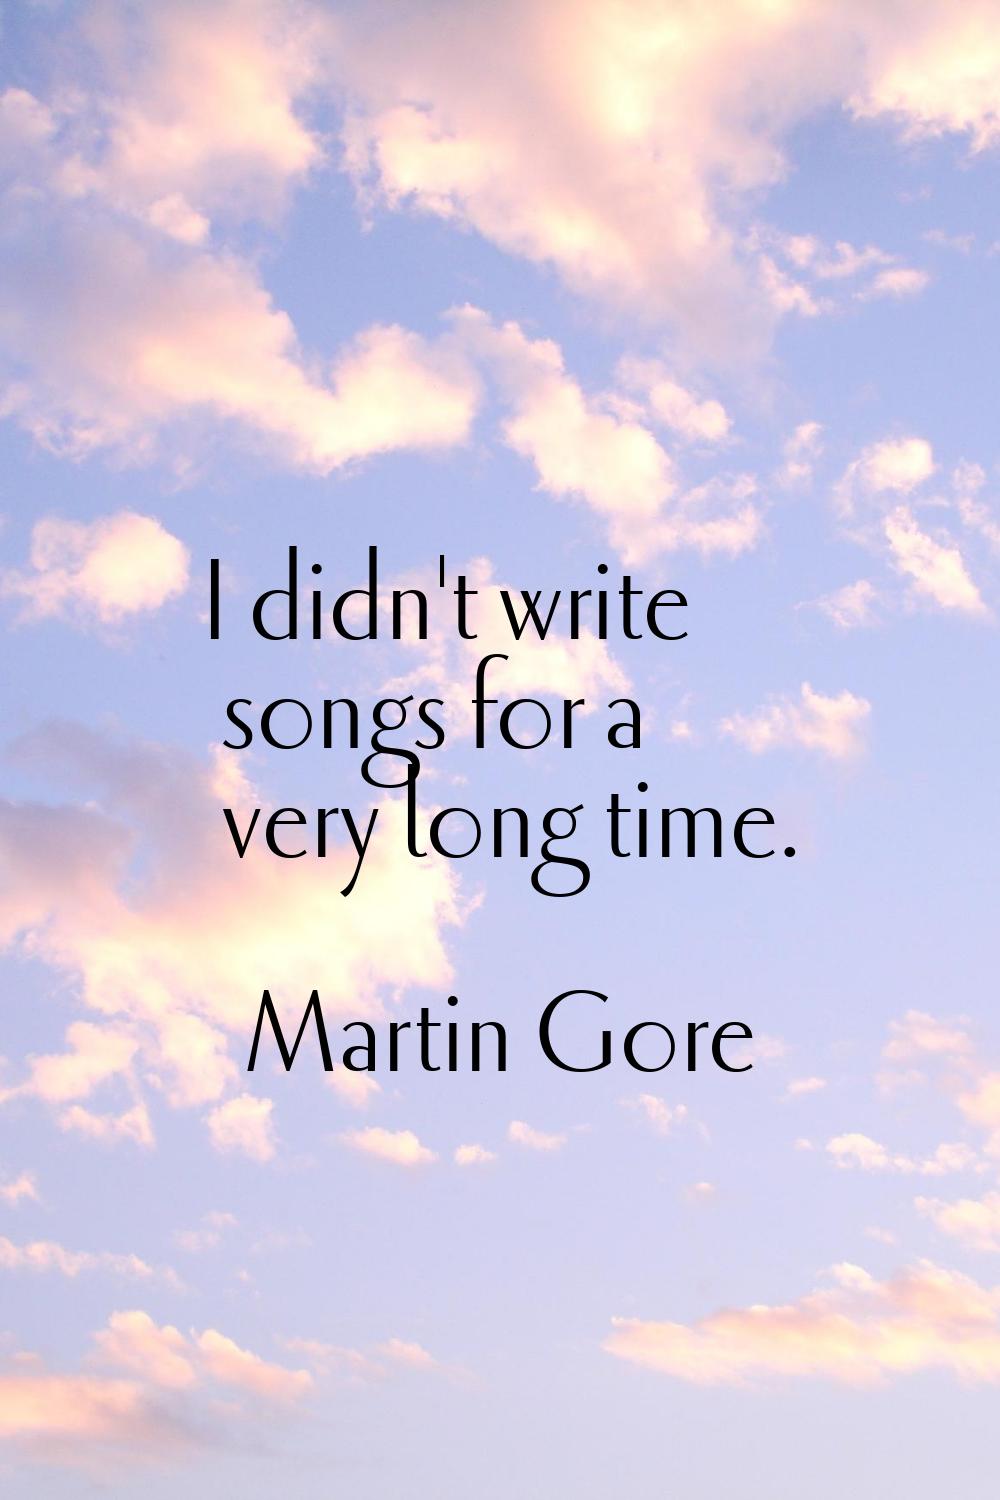 I didn't write songs for a very long time.